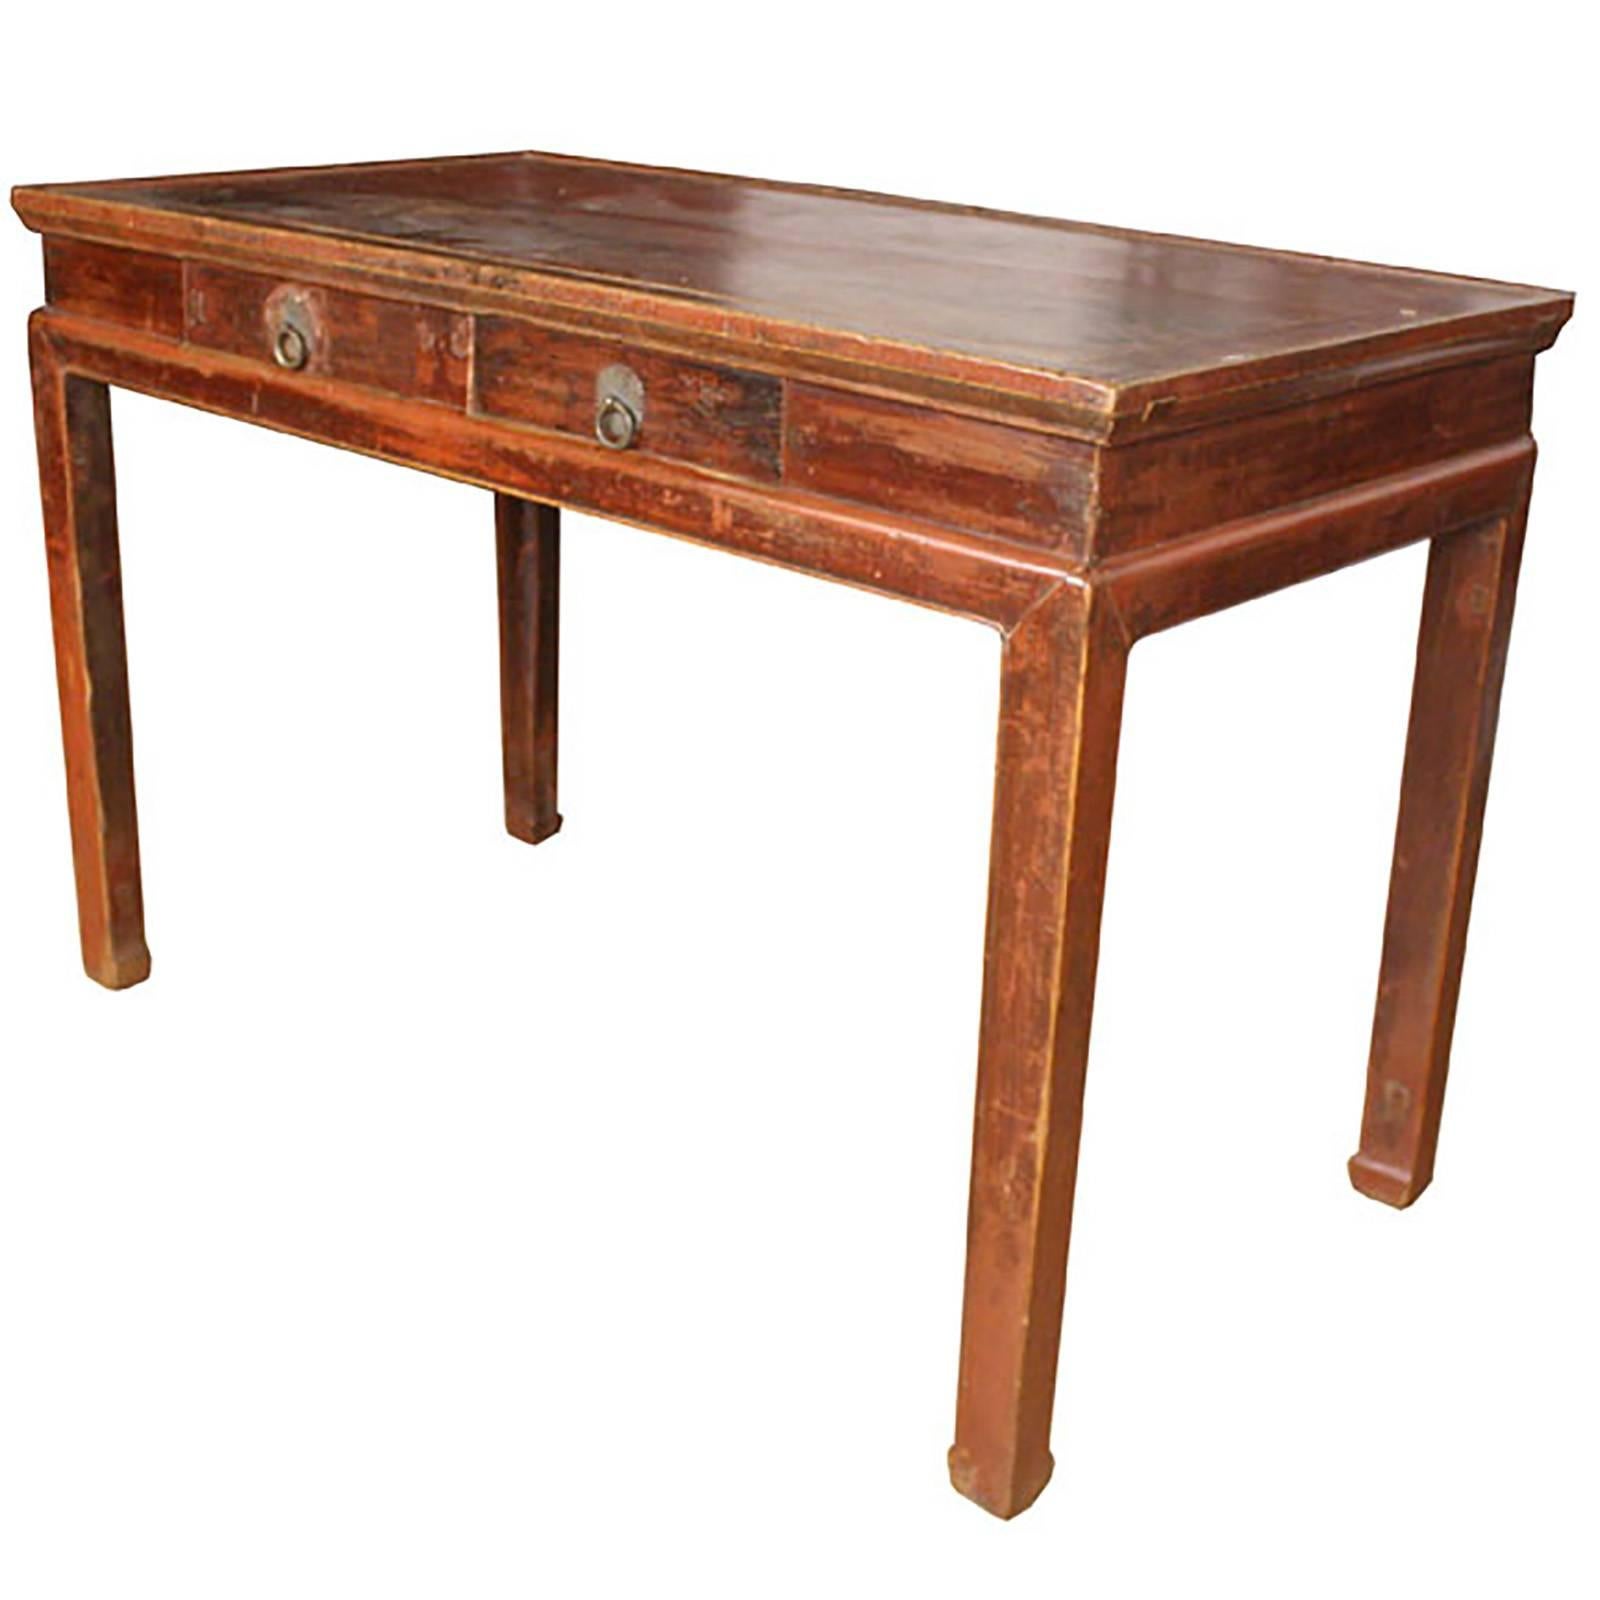 With its open tabletop and roomy leg space, this table is the perfect space for your laptop, writing letters or greeting visitors in the foyer. The original lacquer has weathered to a warm russet tone. The solid Qing dynasty craftsmanship and